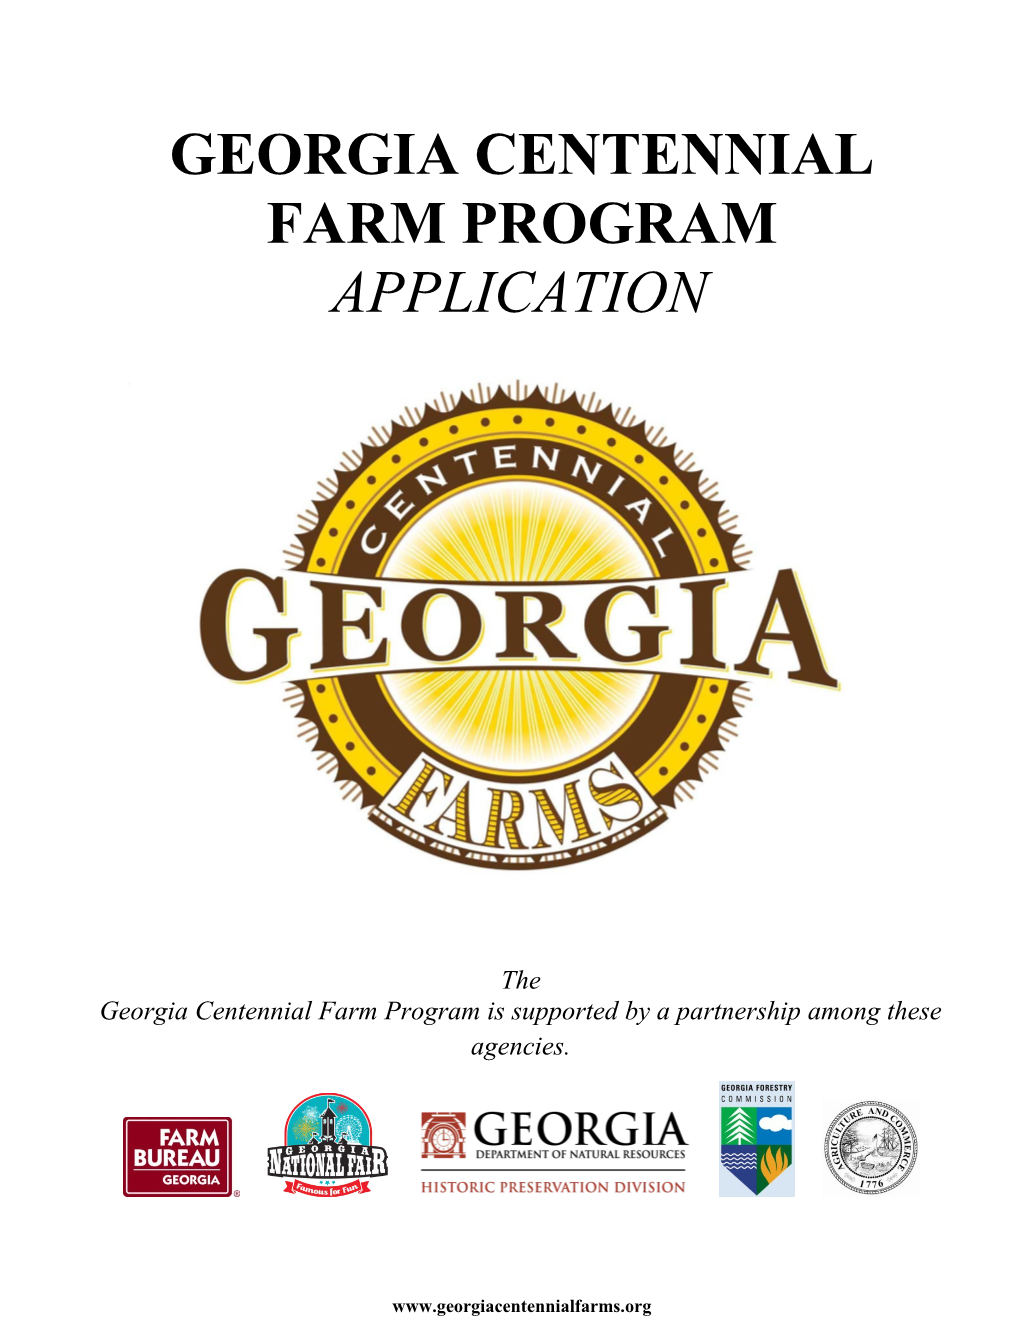 Georgia Centennial Farm Program Is Supported by a Partnership Among These Agencies